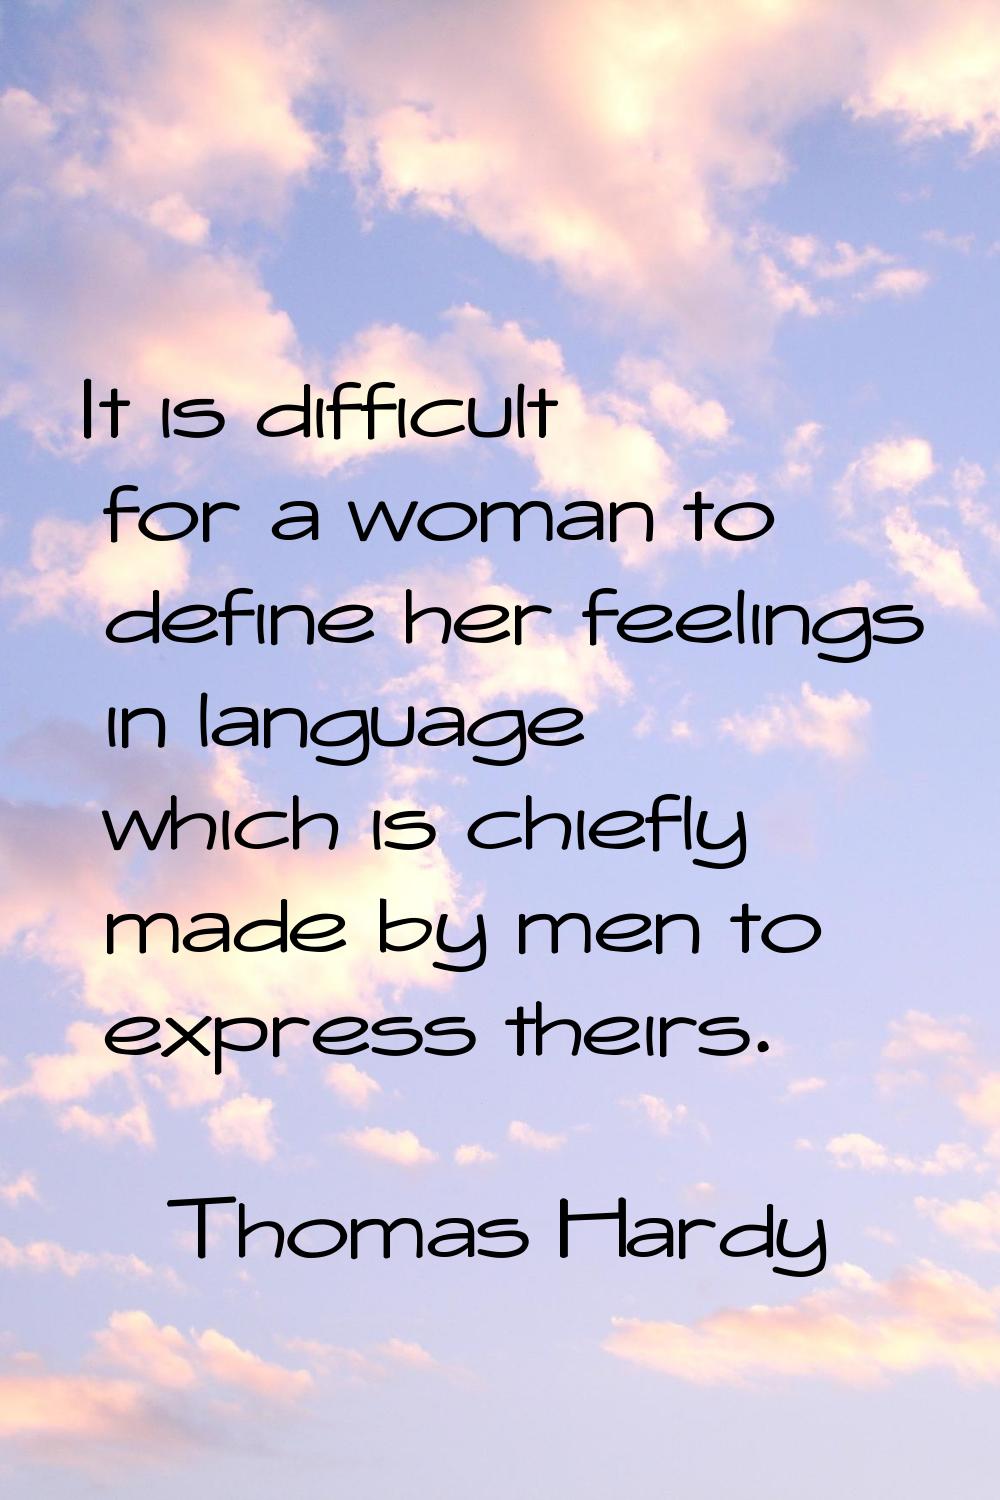 It is difficult for a woman to define her feelings in language which is chiefly made by men to expr